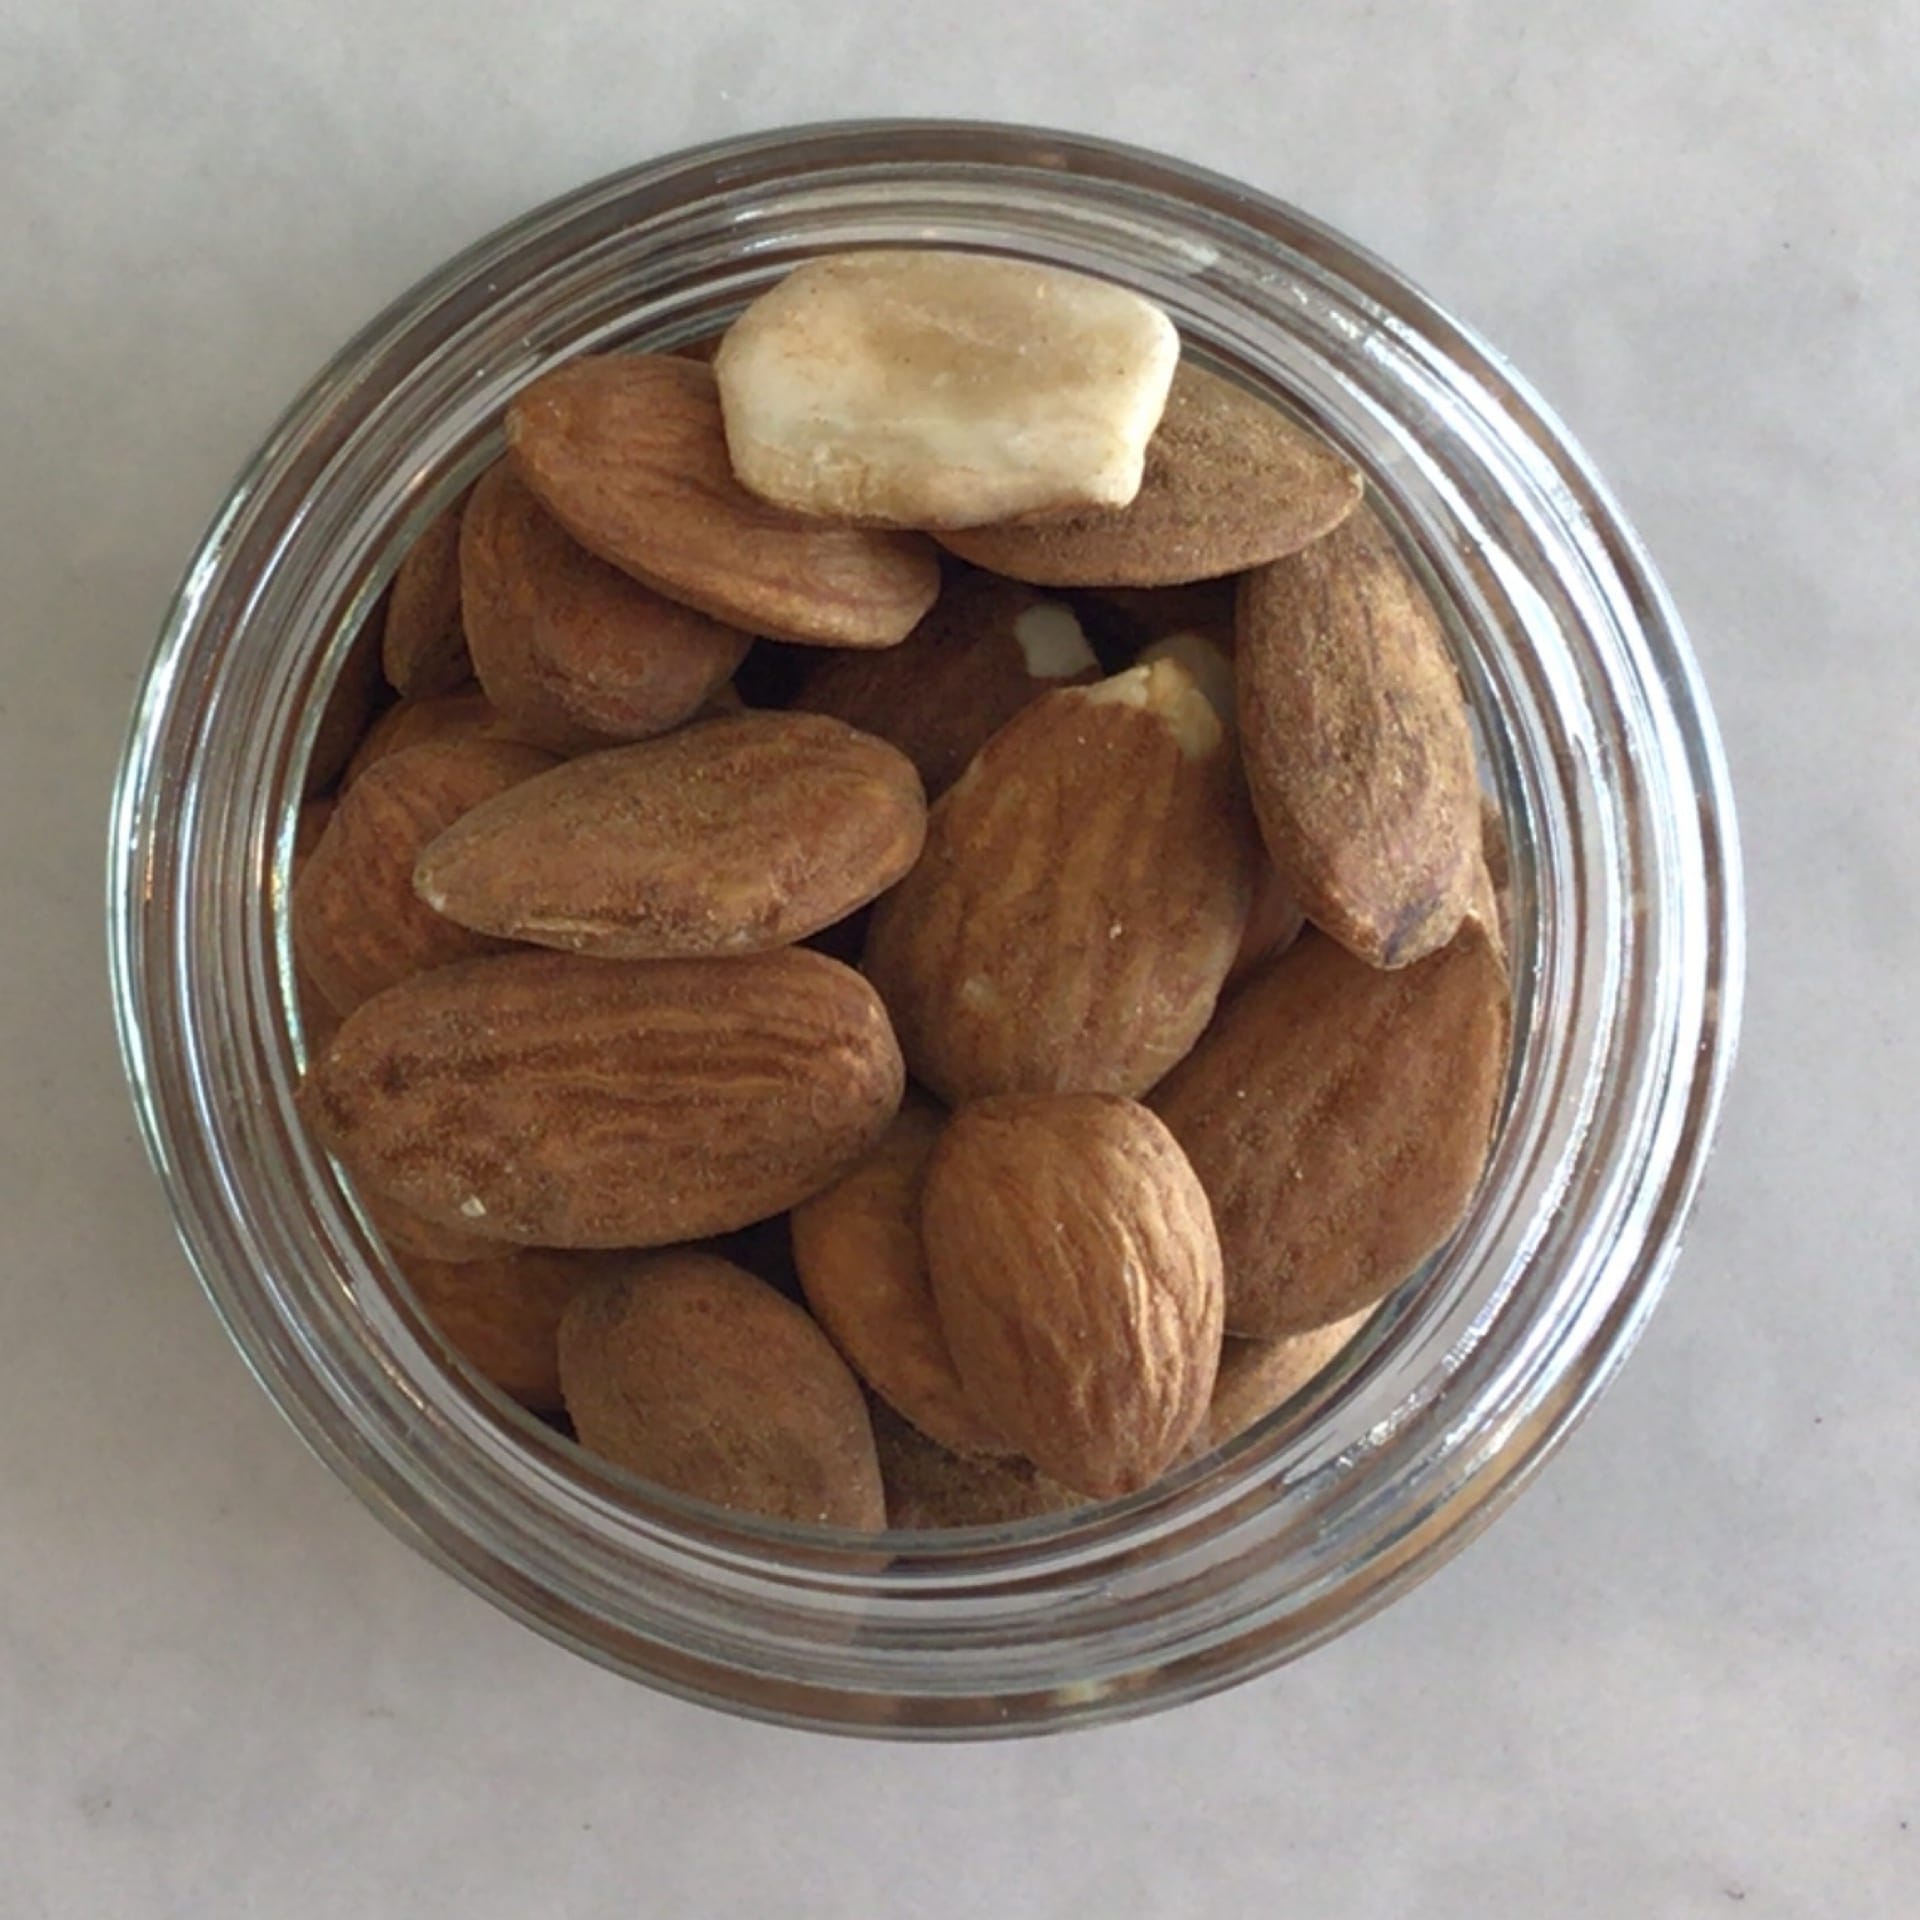 Whole Raw Almonds you can buy by the pound